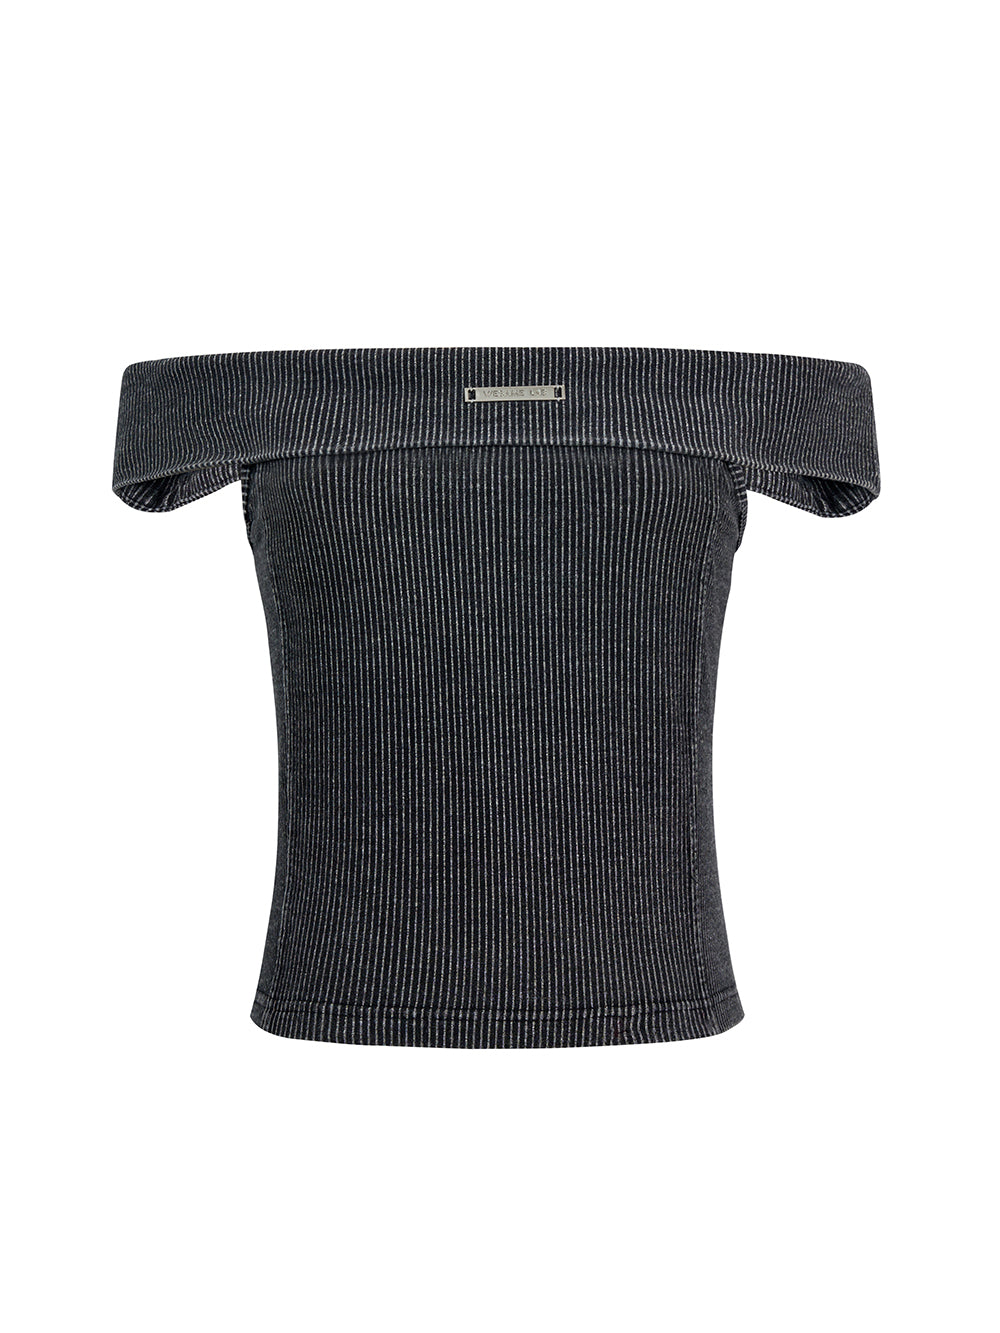 MUKTANK×WESAME Knitted Drawstring Stretchy One-shoulder T-shirts